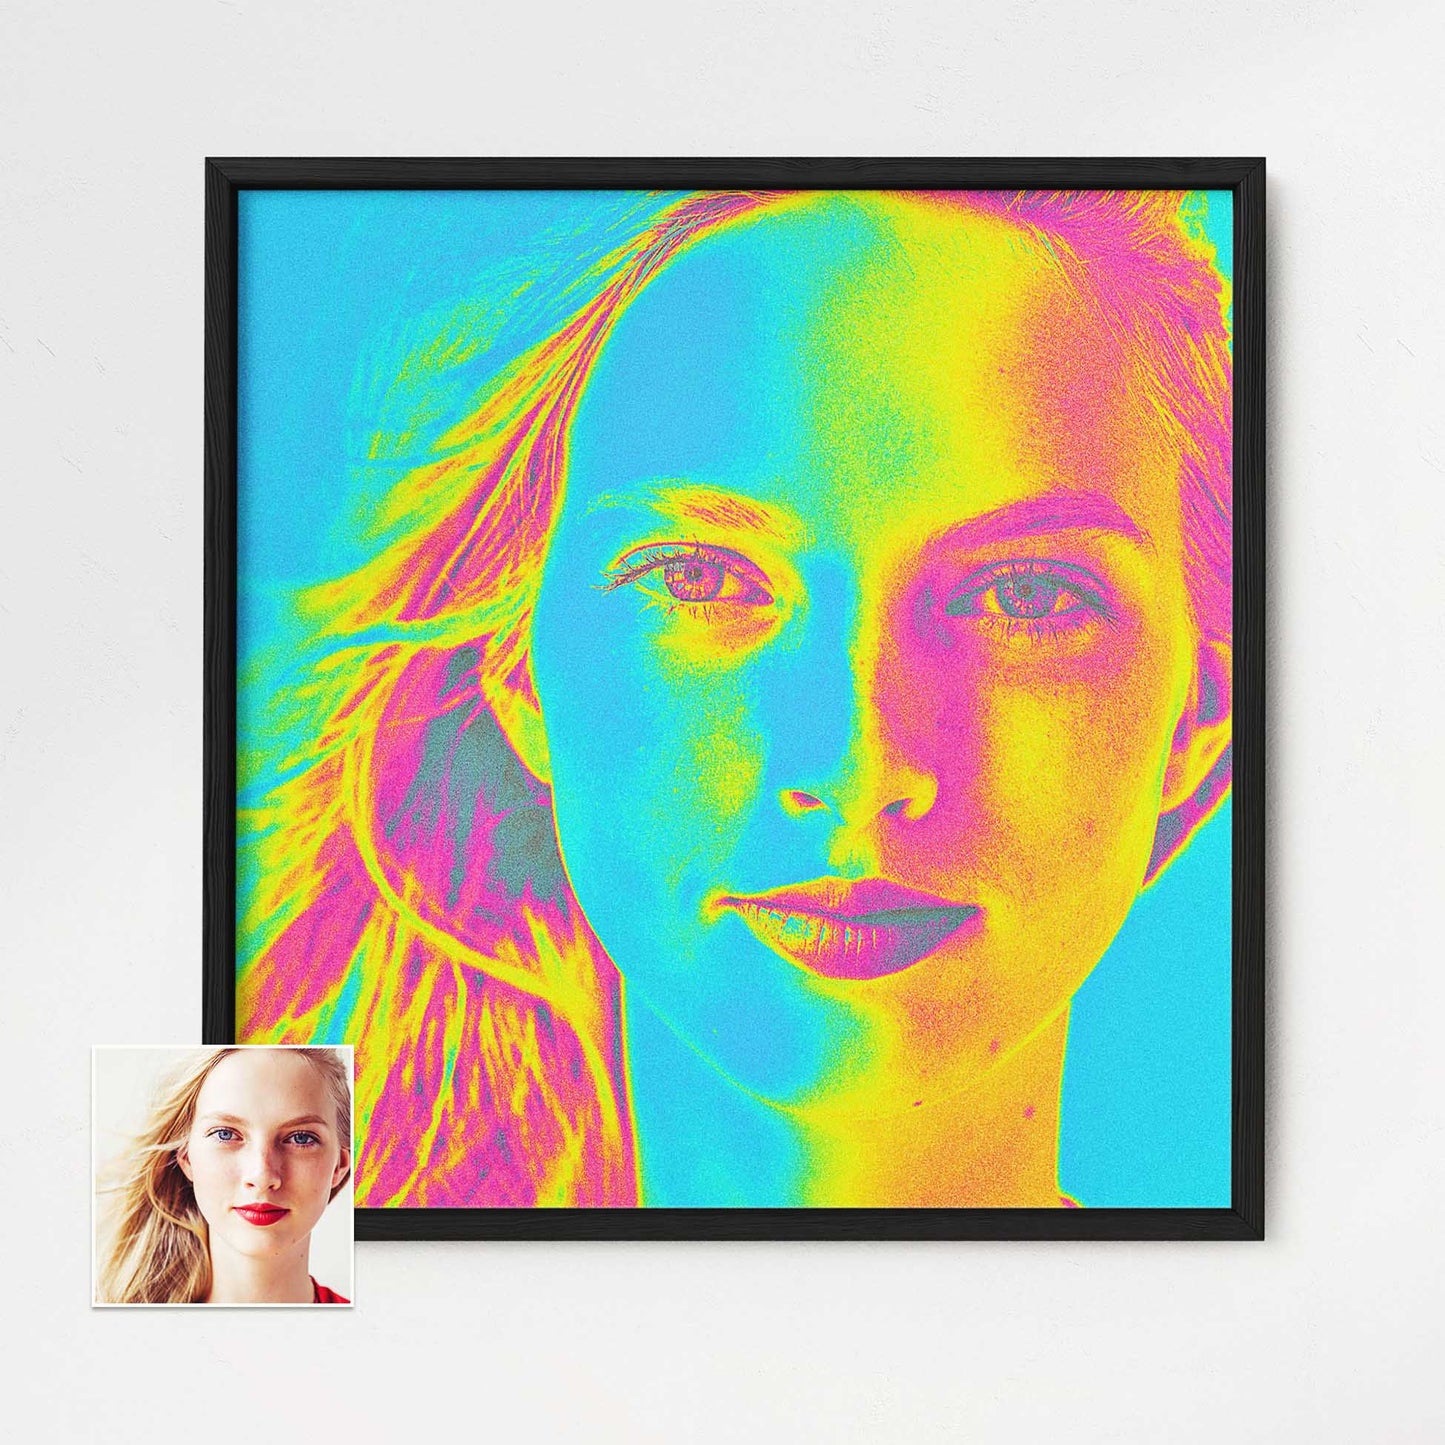 Personalised Acid Trip Framed Print is a stunning example of fine digital art. Its colorful and vivid design makes a bold statement, adding a vibrant and energetic touch to your home decor. Print from your photo